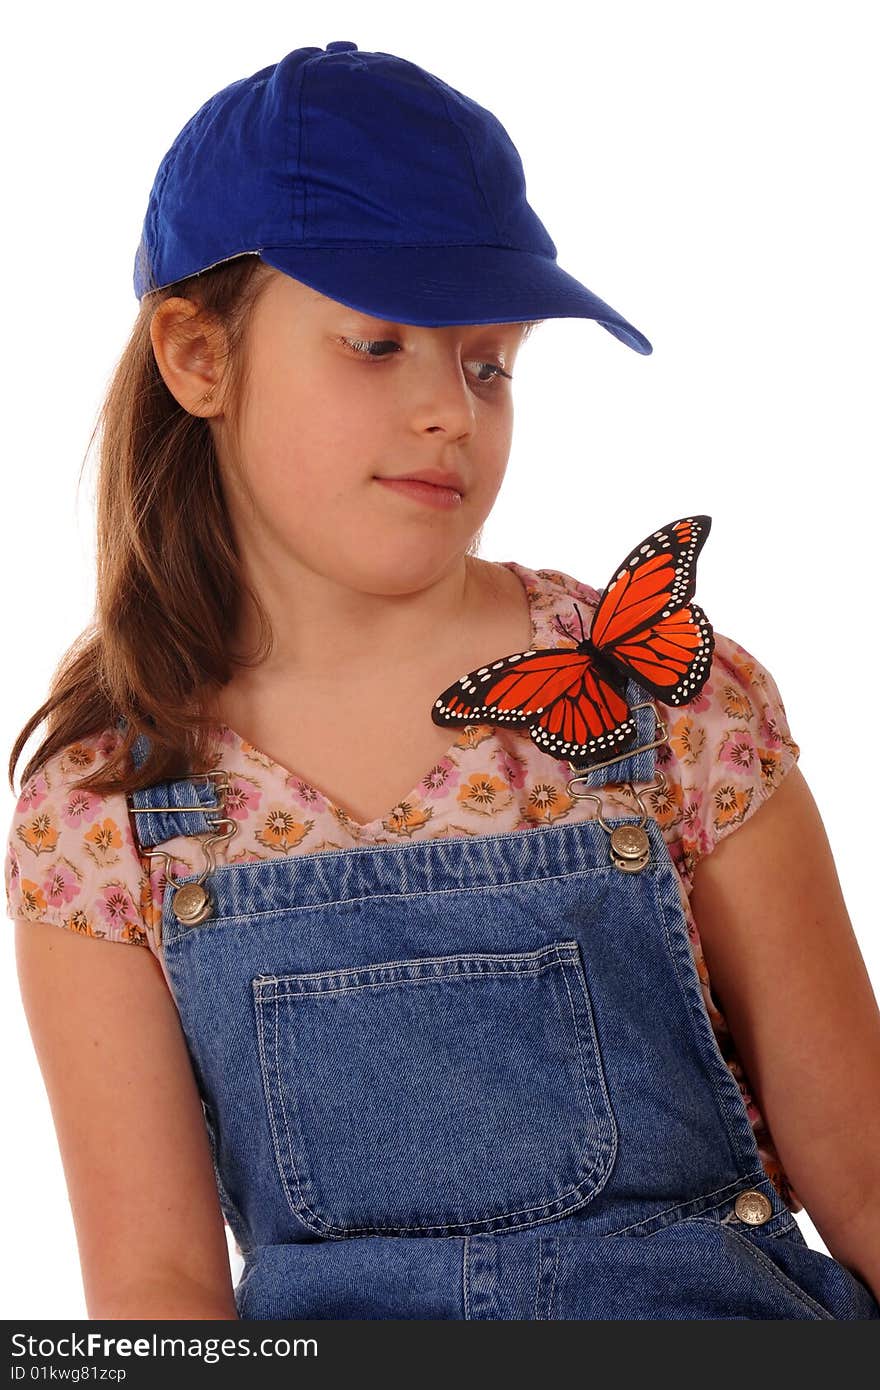 An elementary girl leary of a large Monarch butterfly resting on her shoulder. Isolated on white. An elementary girl leary of a large Monarch butterfly resting on her shoulder. Isolated on white.